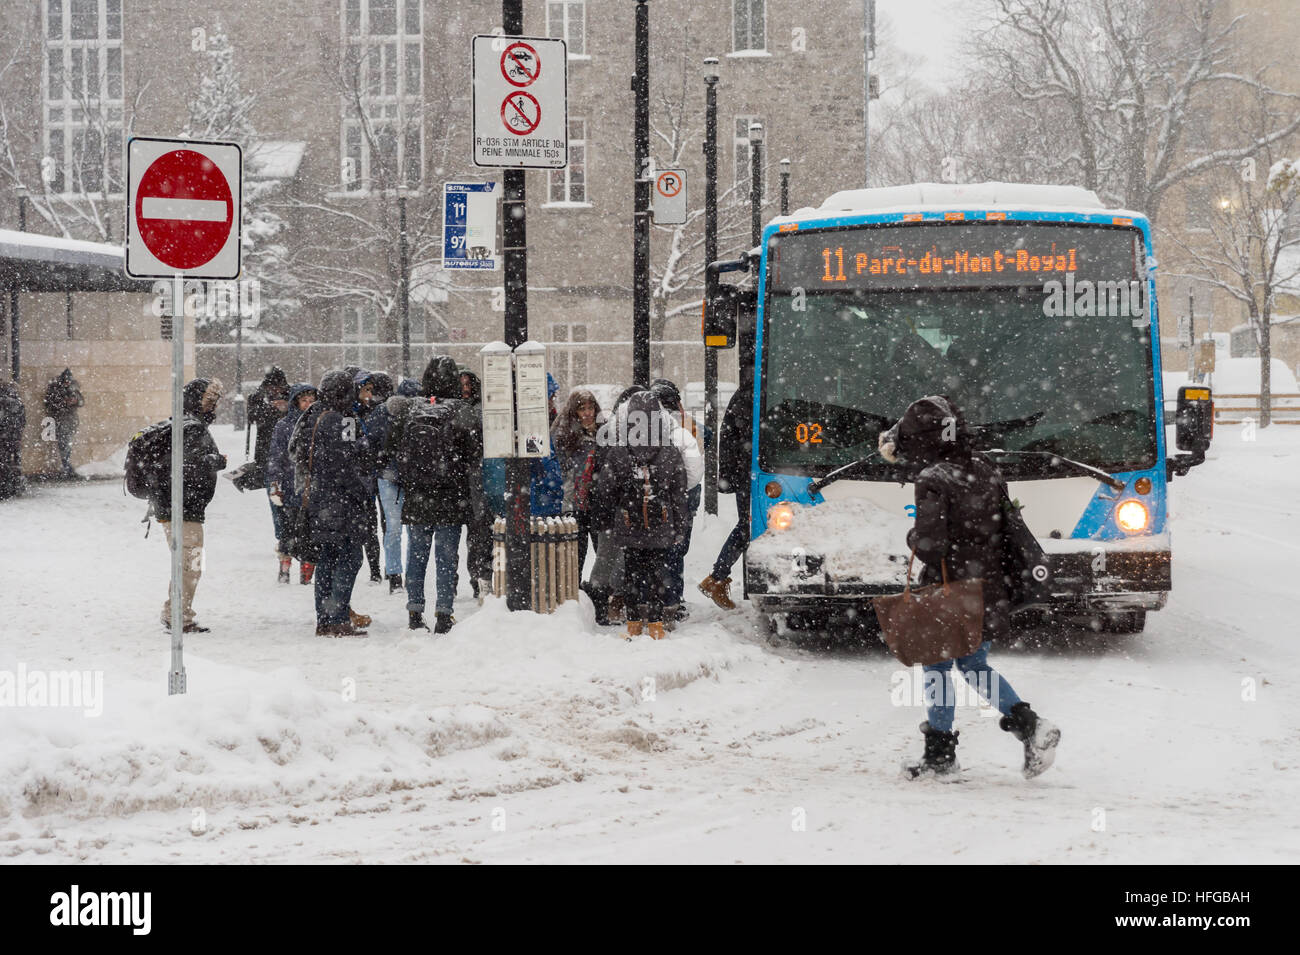 Montreal, CA - 12 December 2016: Commuters boarding a STM bus during snow storm. Stock Photo